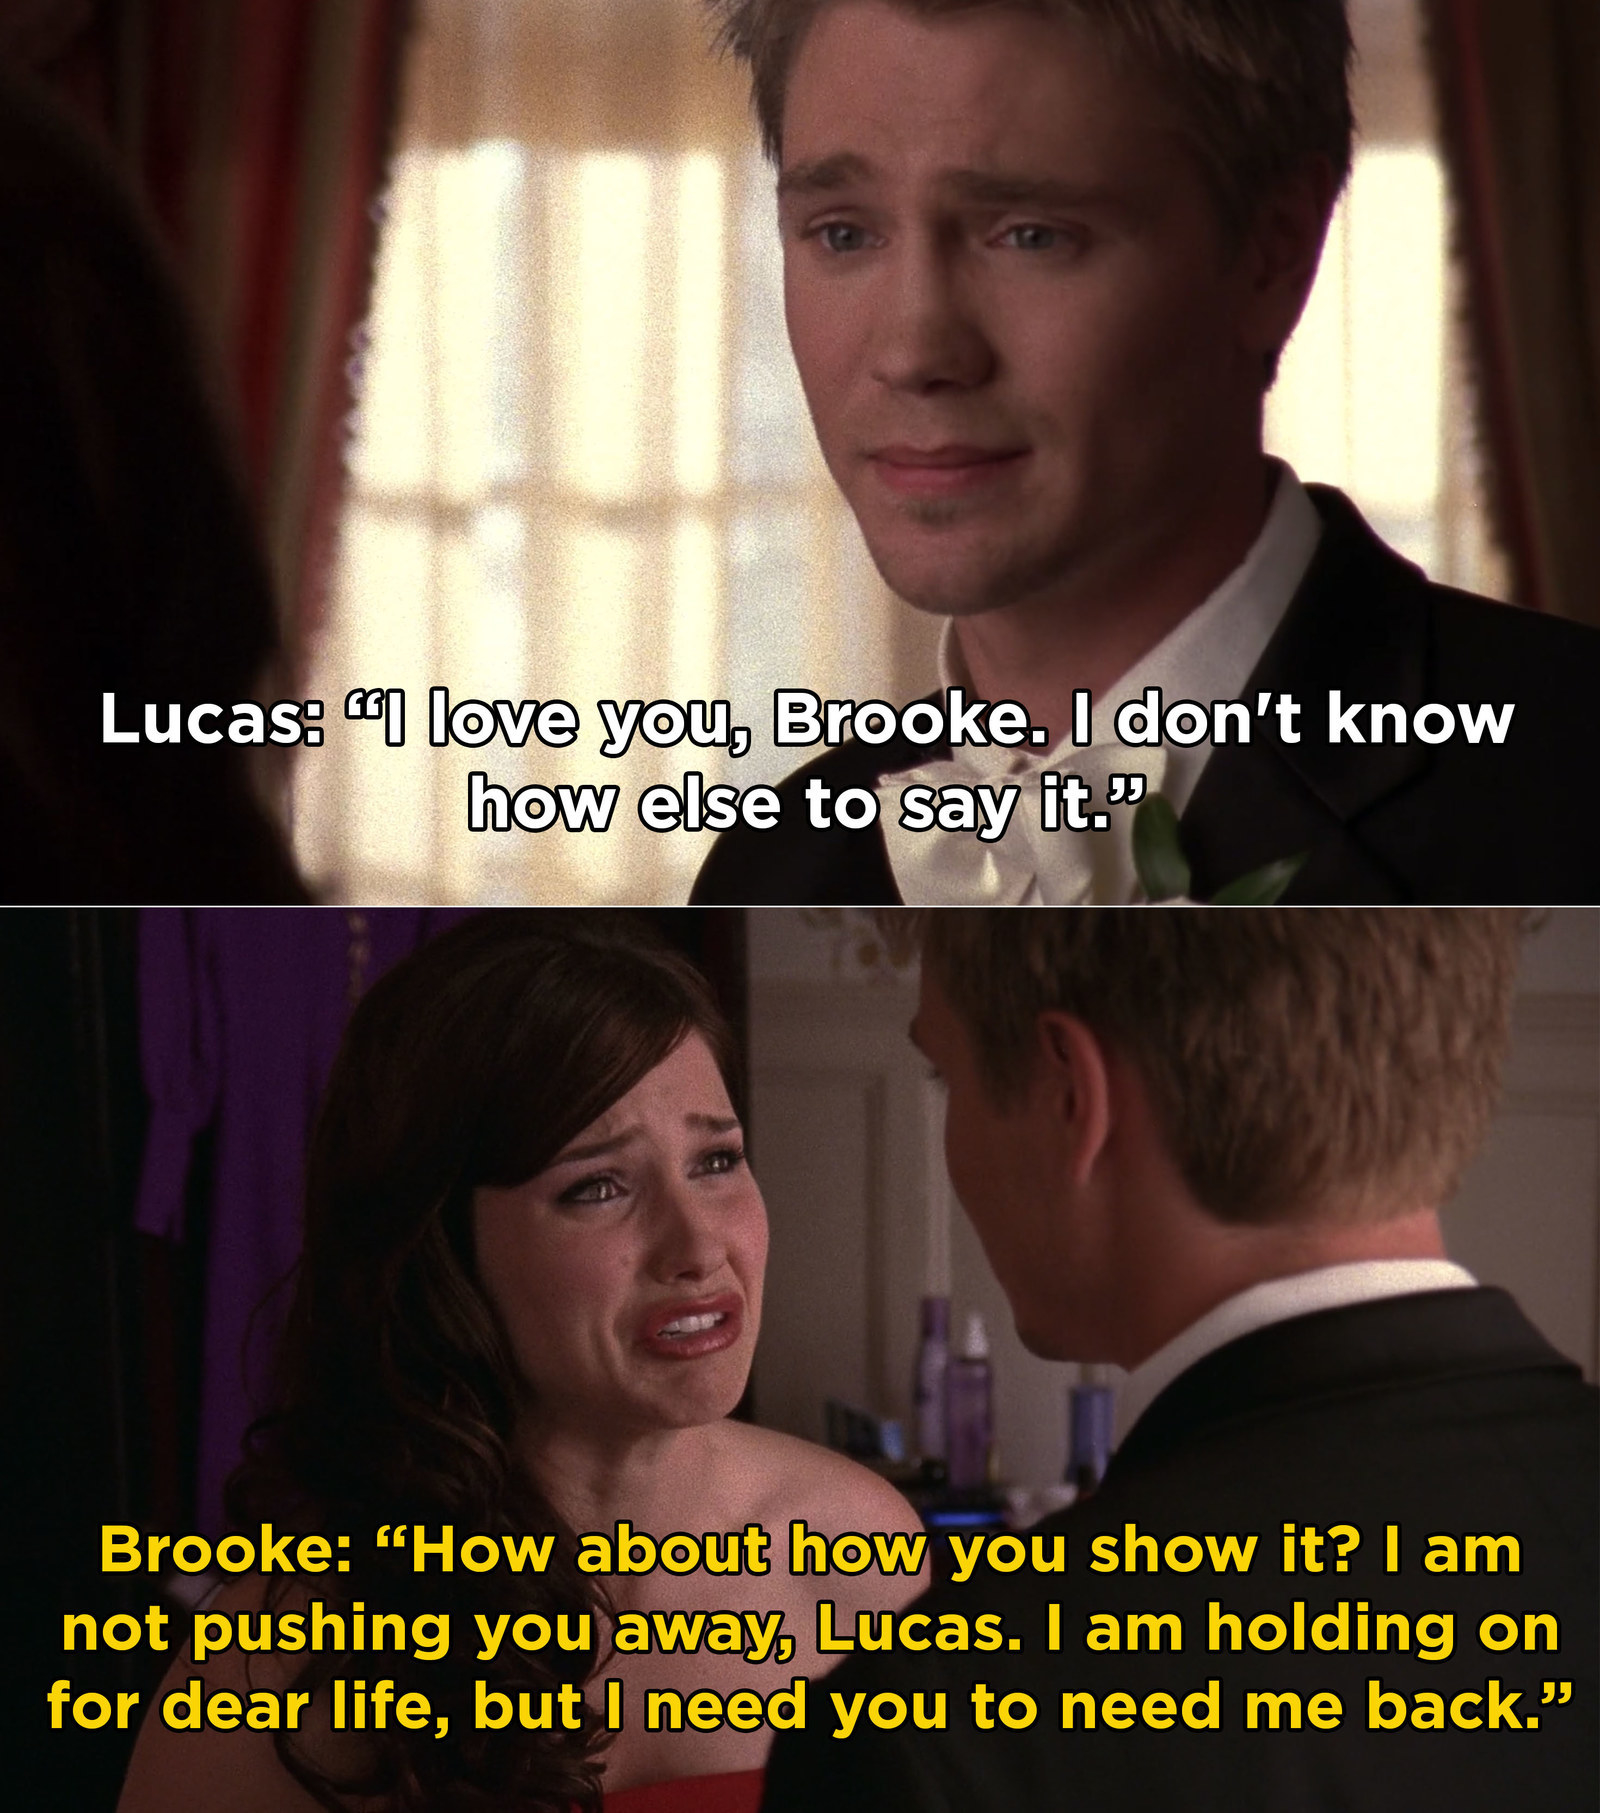 Luke: &quot;I love you, Brooke. I don&#x27;t know how else to say it.&quot; Brooke: &quot;How about who you show it? I am not pushing you away, Lucas. I am holding on for dear life, but I need you to need me back.&quot;